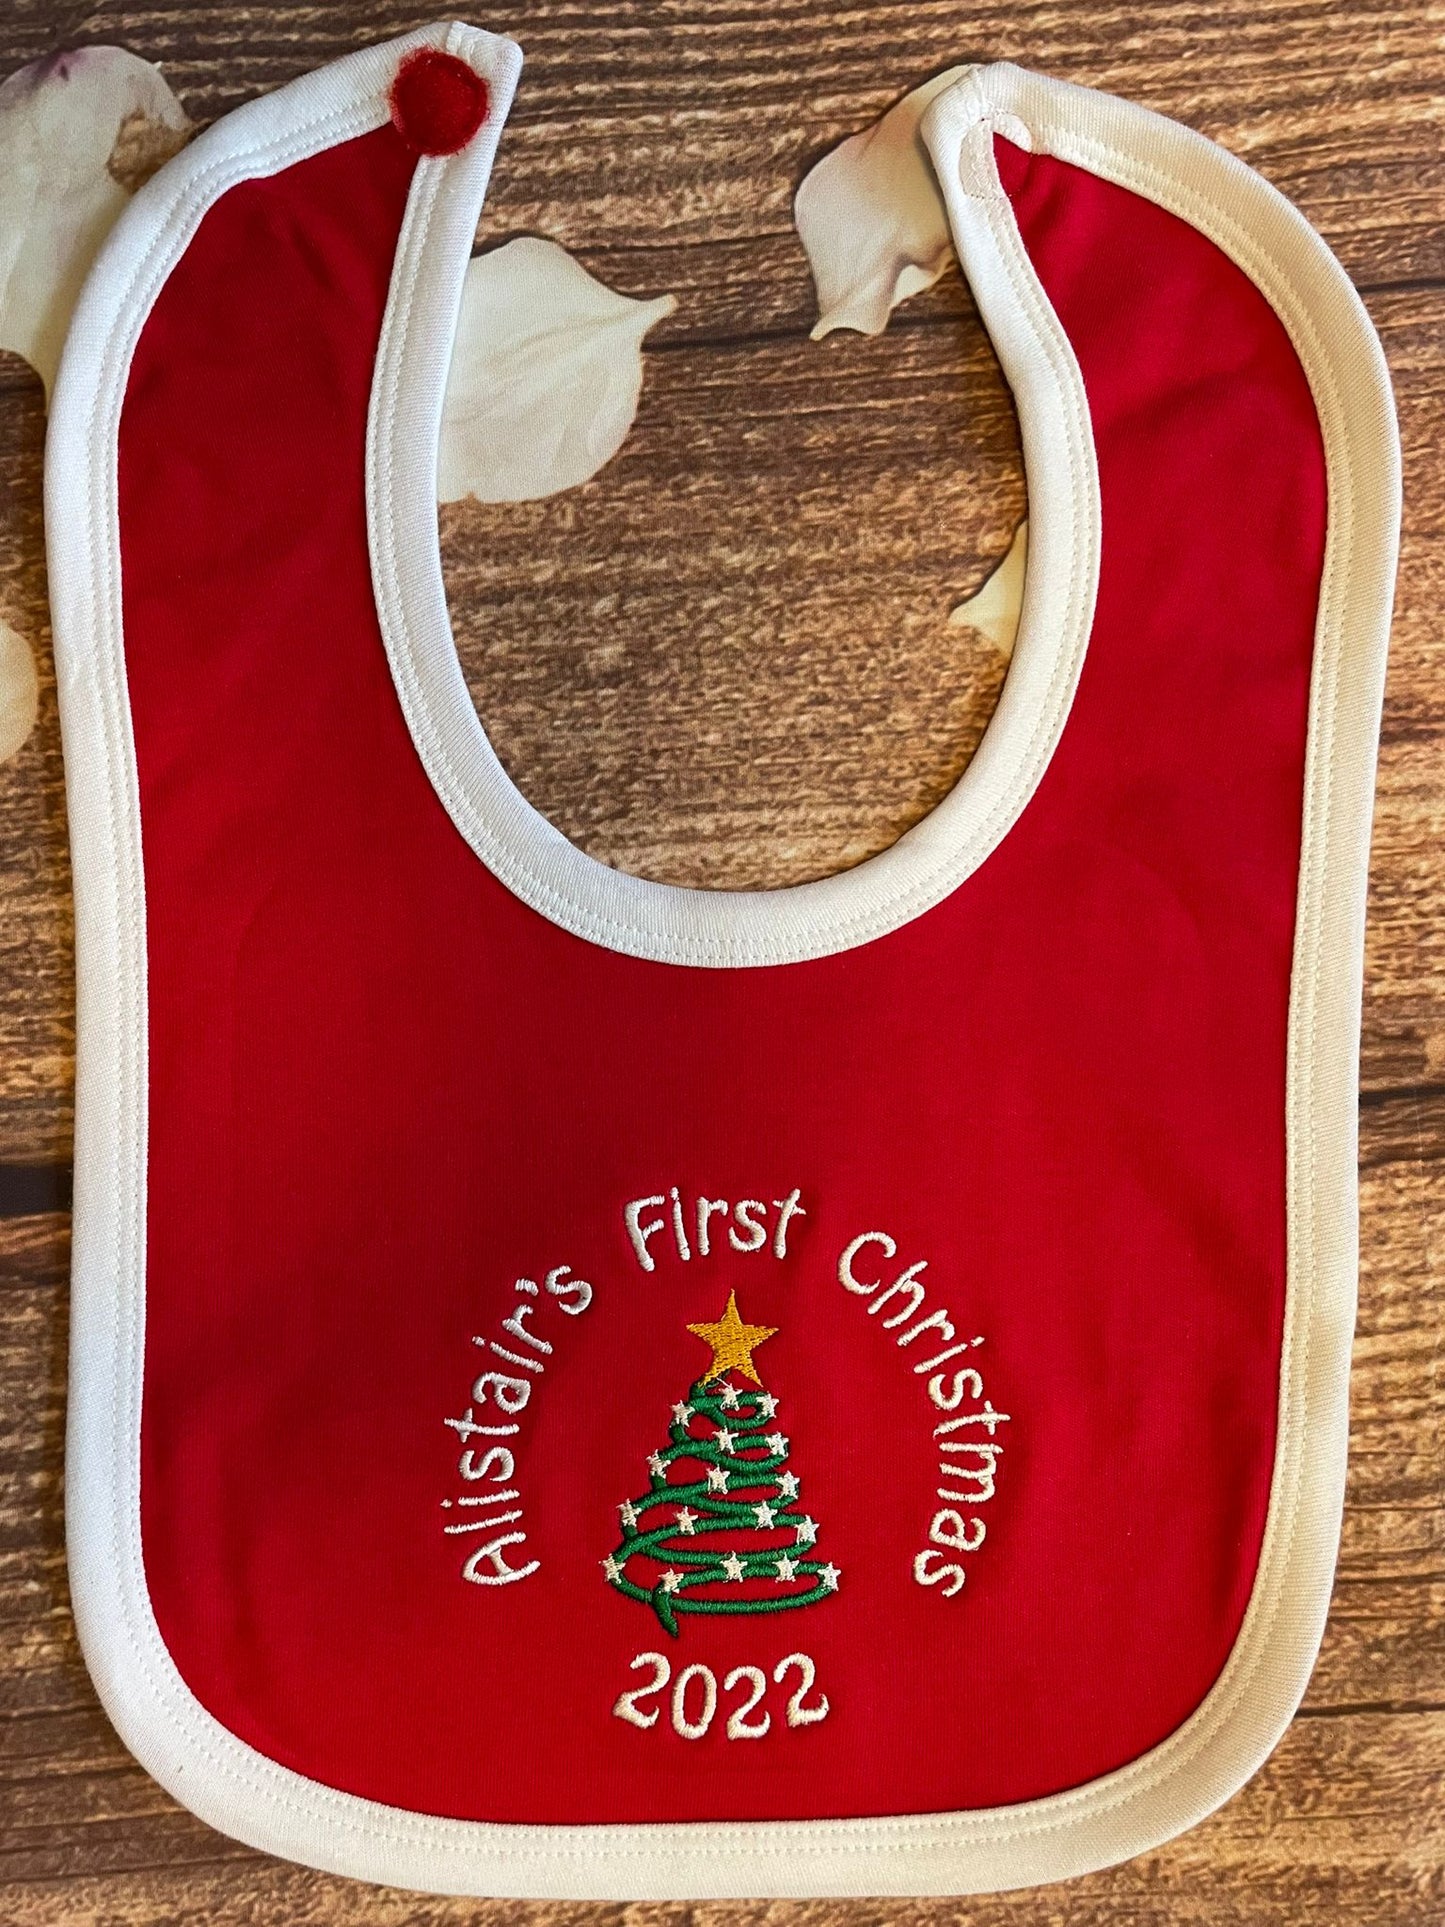 First Christmas bib, embroidered with name, year & choice of Christmas motif. White or red